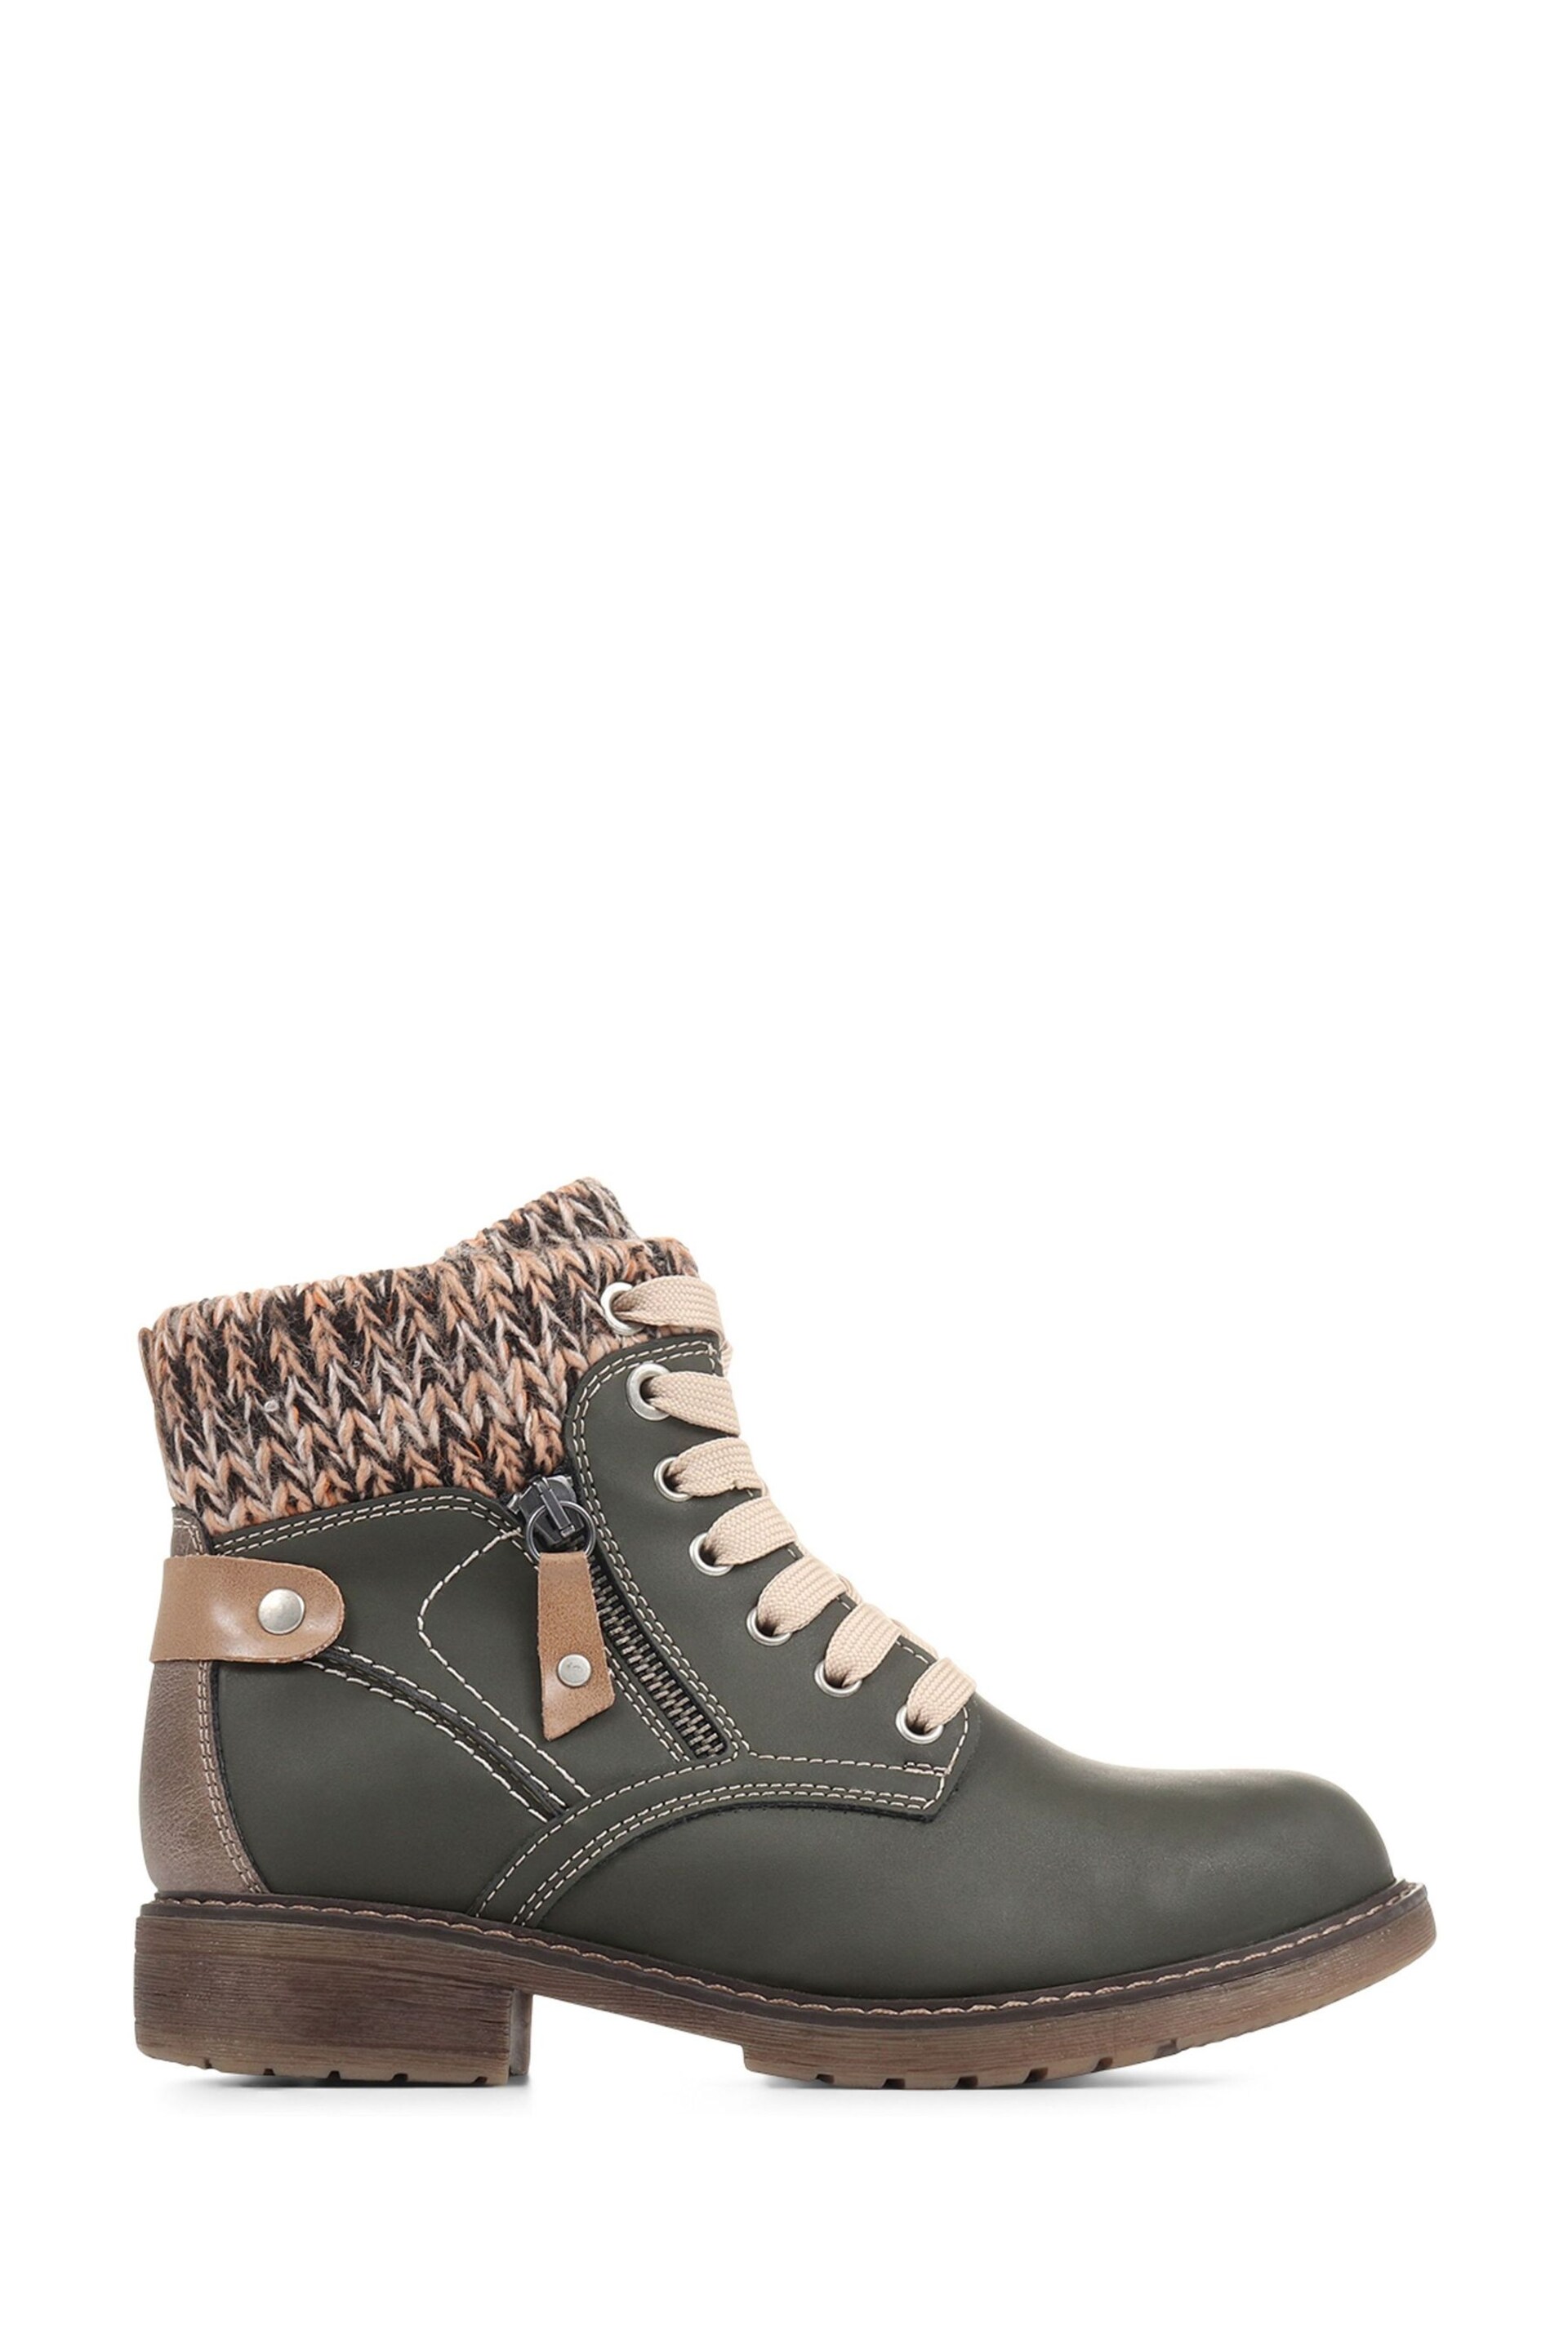 Pavers Green Lace-Up Ankle Boots - Image 1 of 6